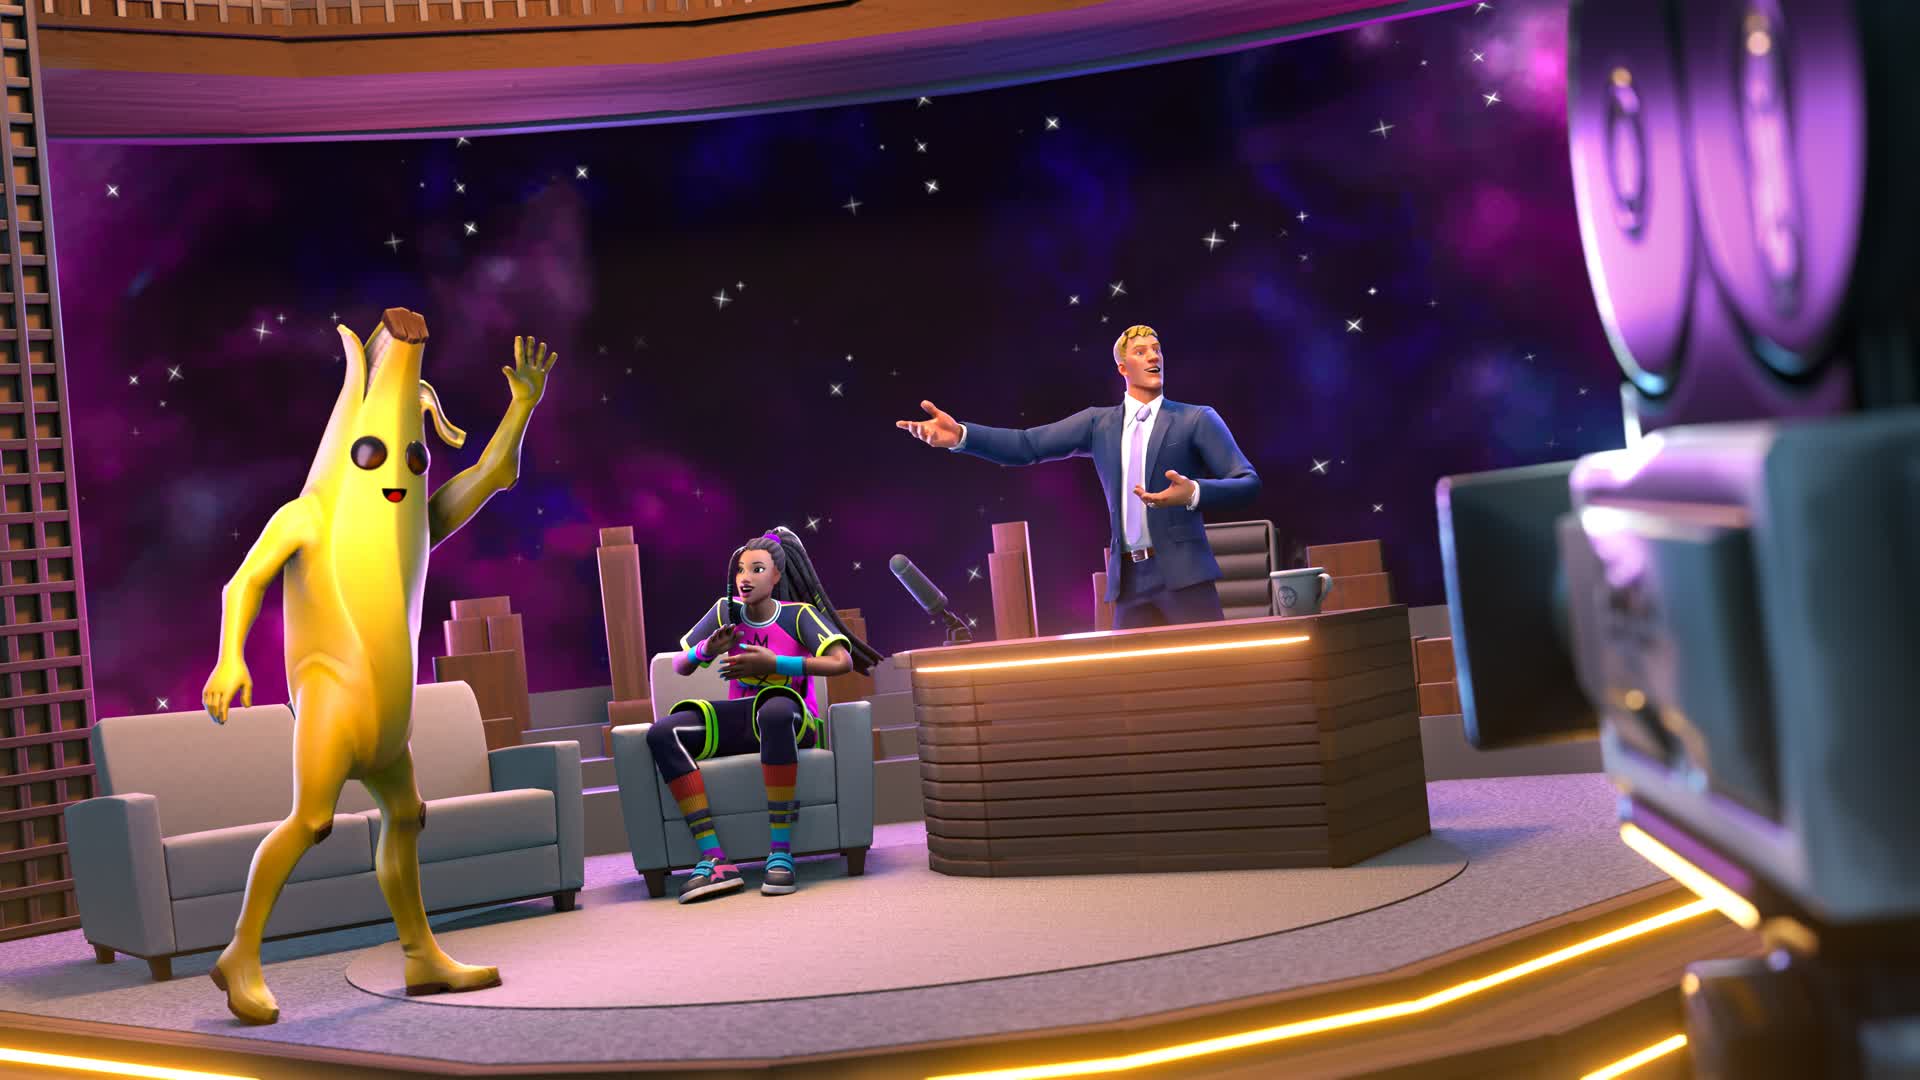 An image from Fortnite Creative showing Jonesy hosting the Tonight Show with Peely as a guest